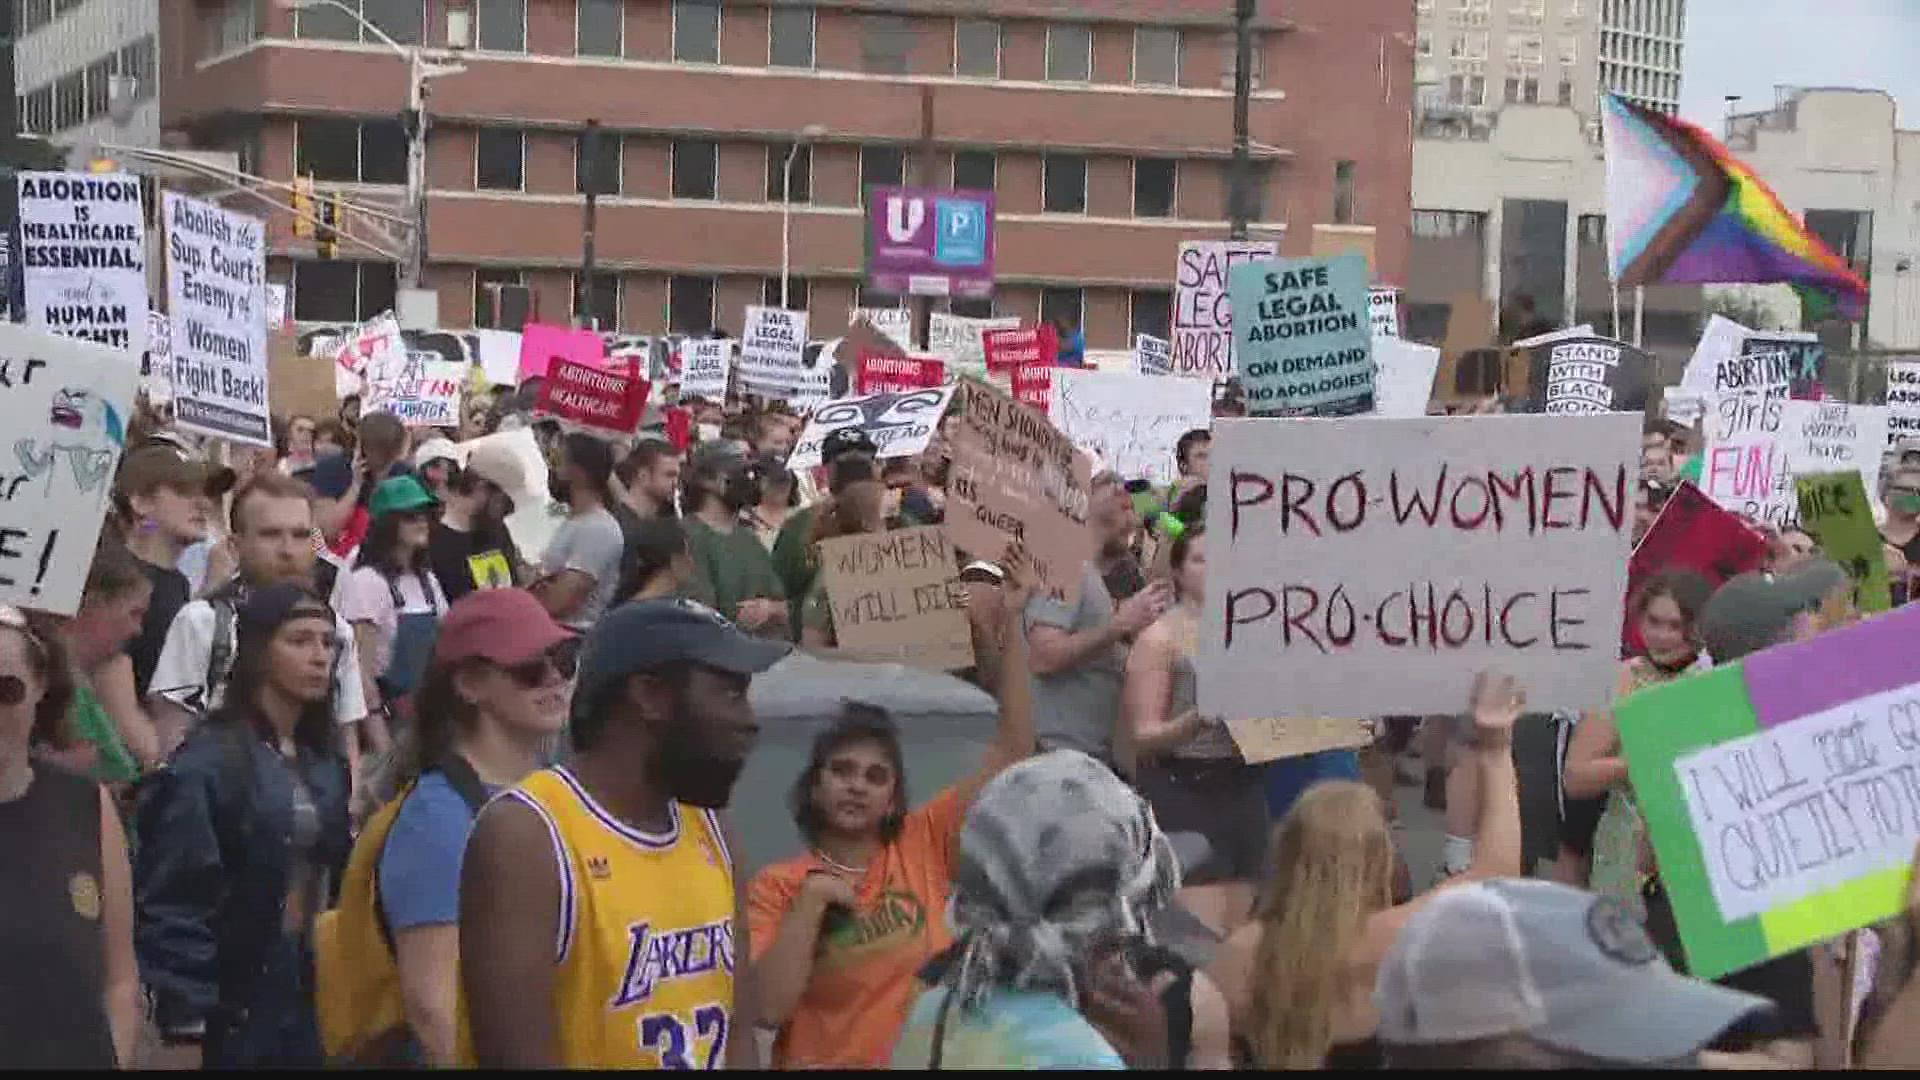 The group gathered at the State Capitol and marched through Downtown.